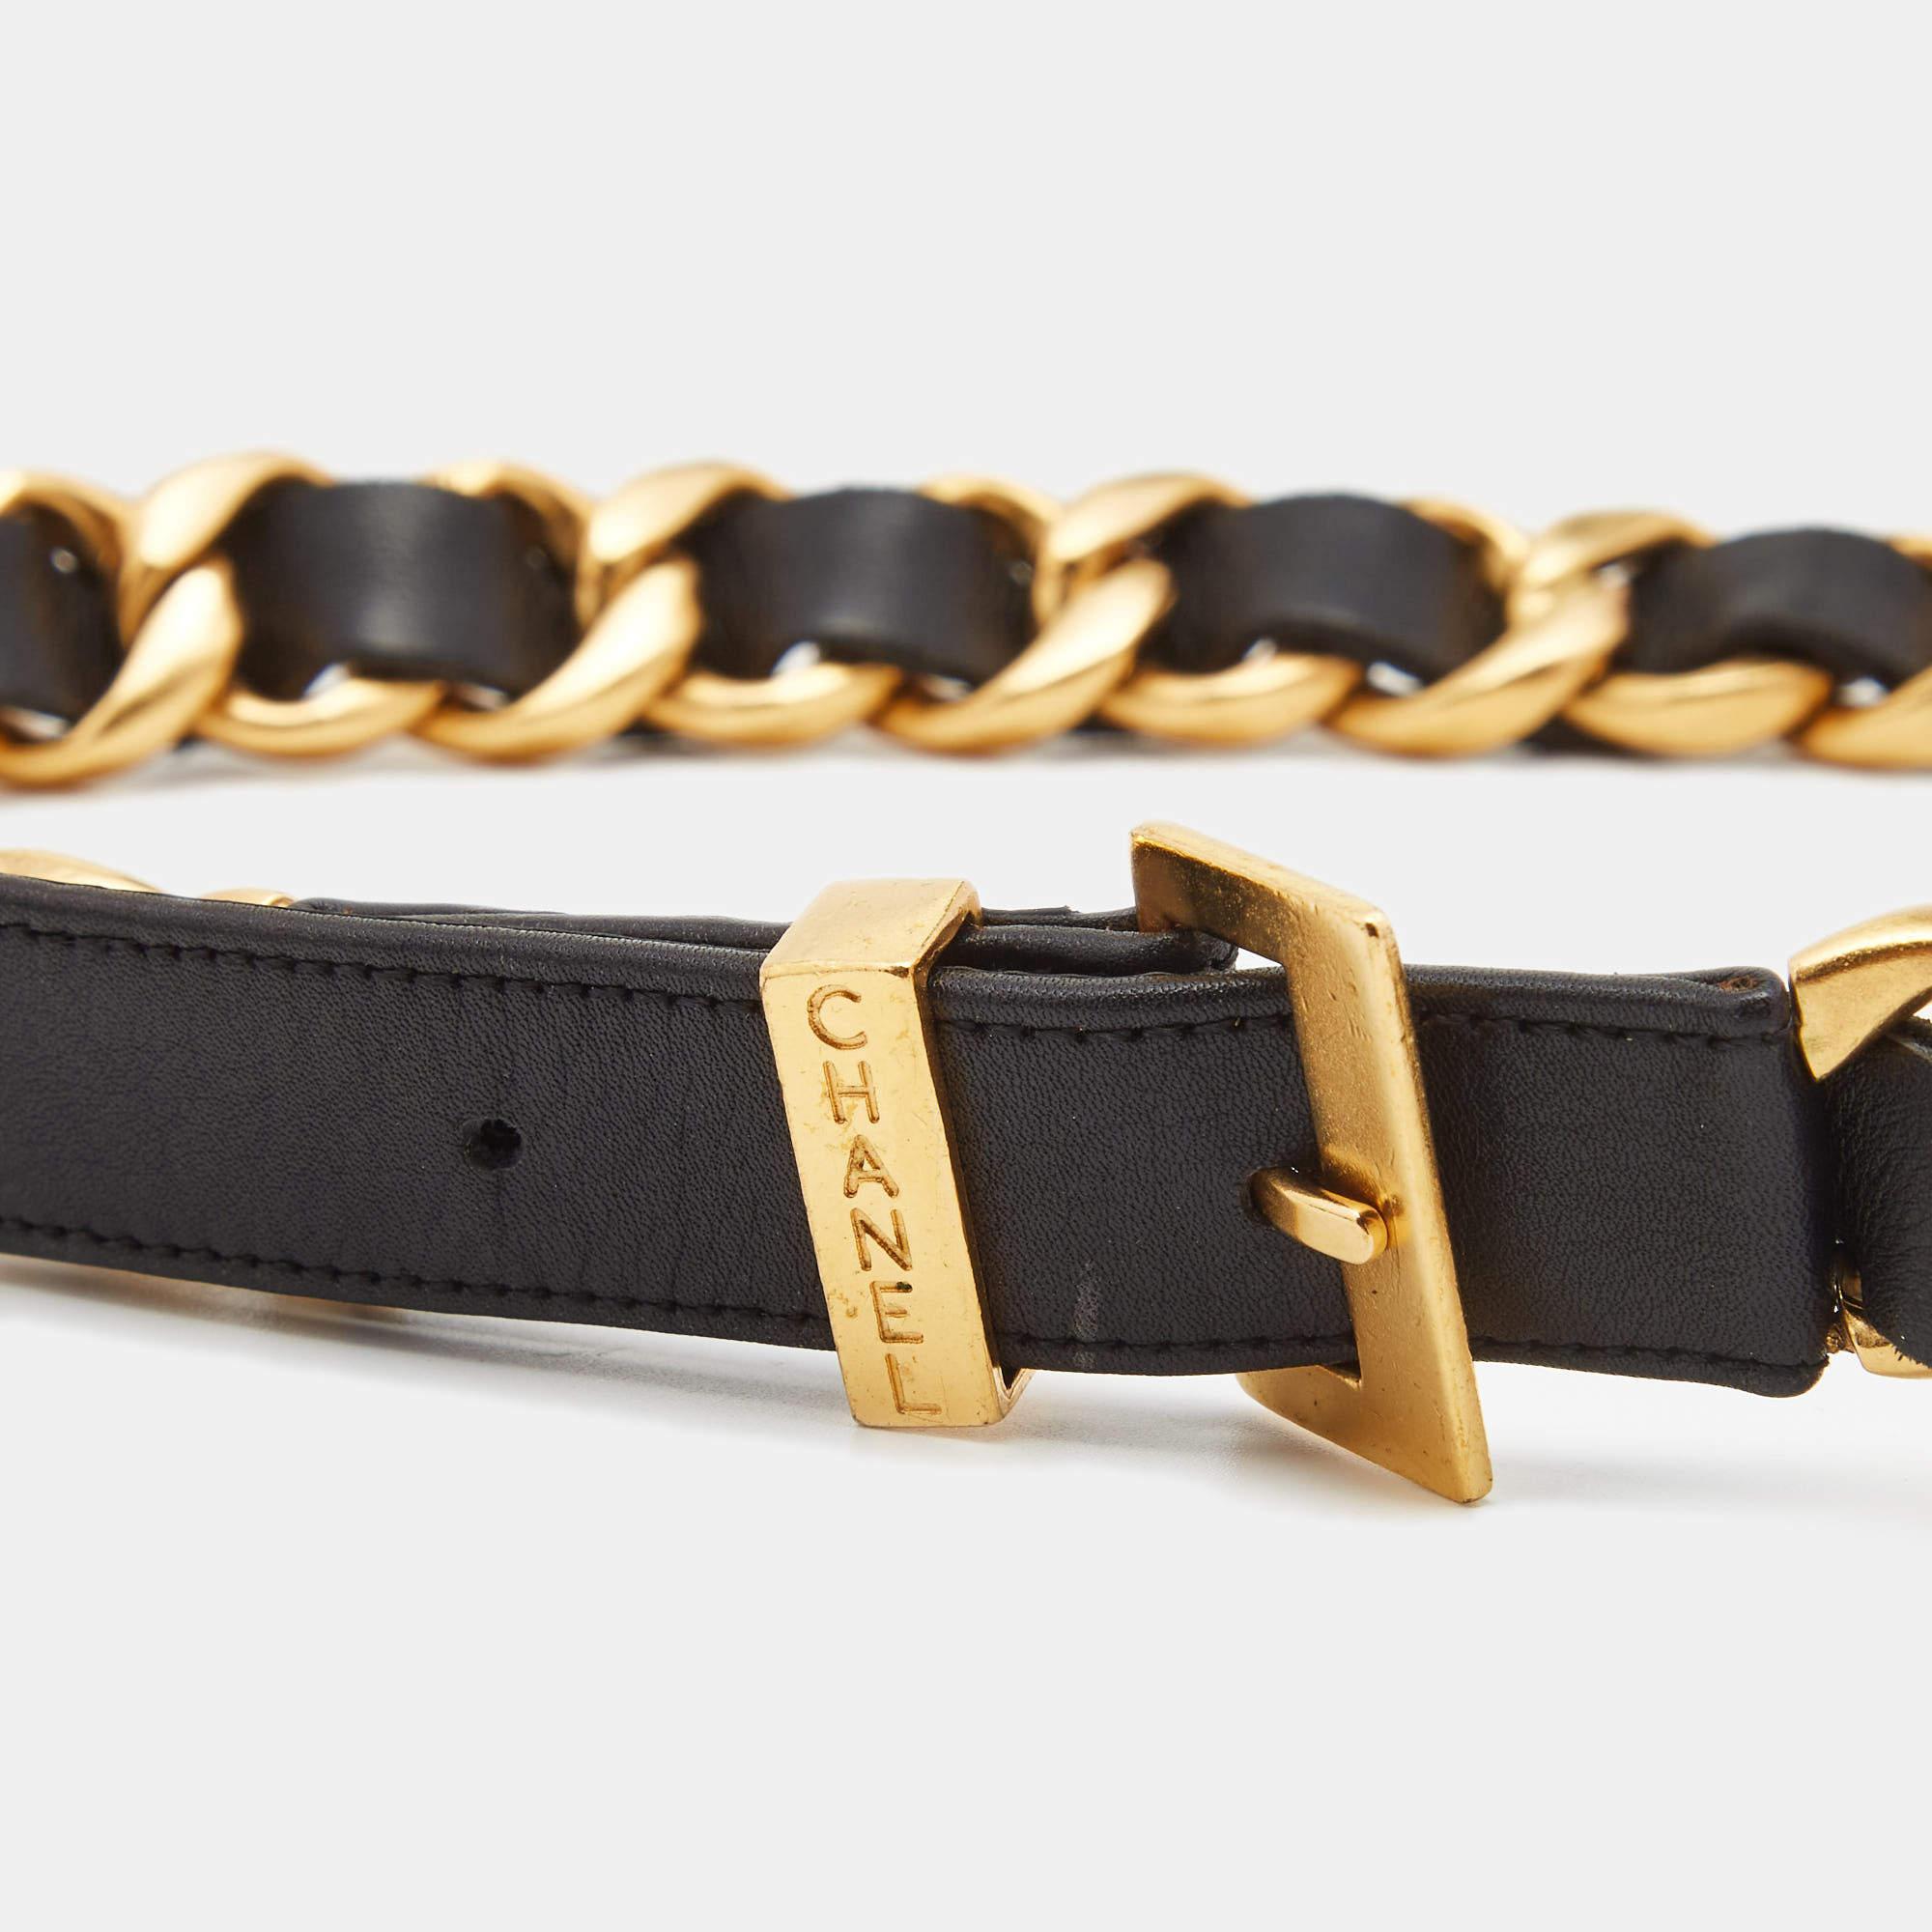 A classic add-on to your collection of belts is this Chanel piece. Cut to a convenient length, the belt has a smooth finish and a sturdy built. This wardrobe essential piece will continually complement your style.

Includes: Original Box

